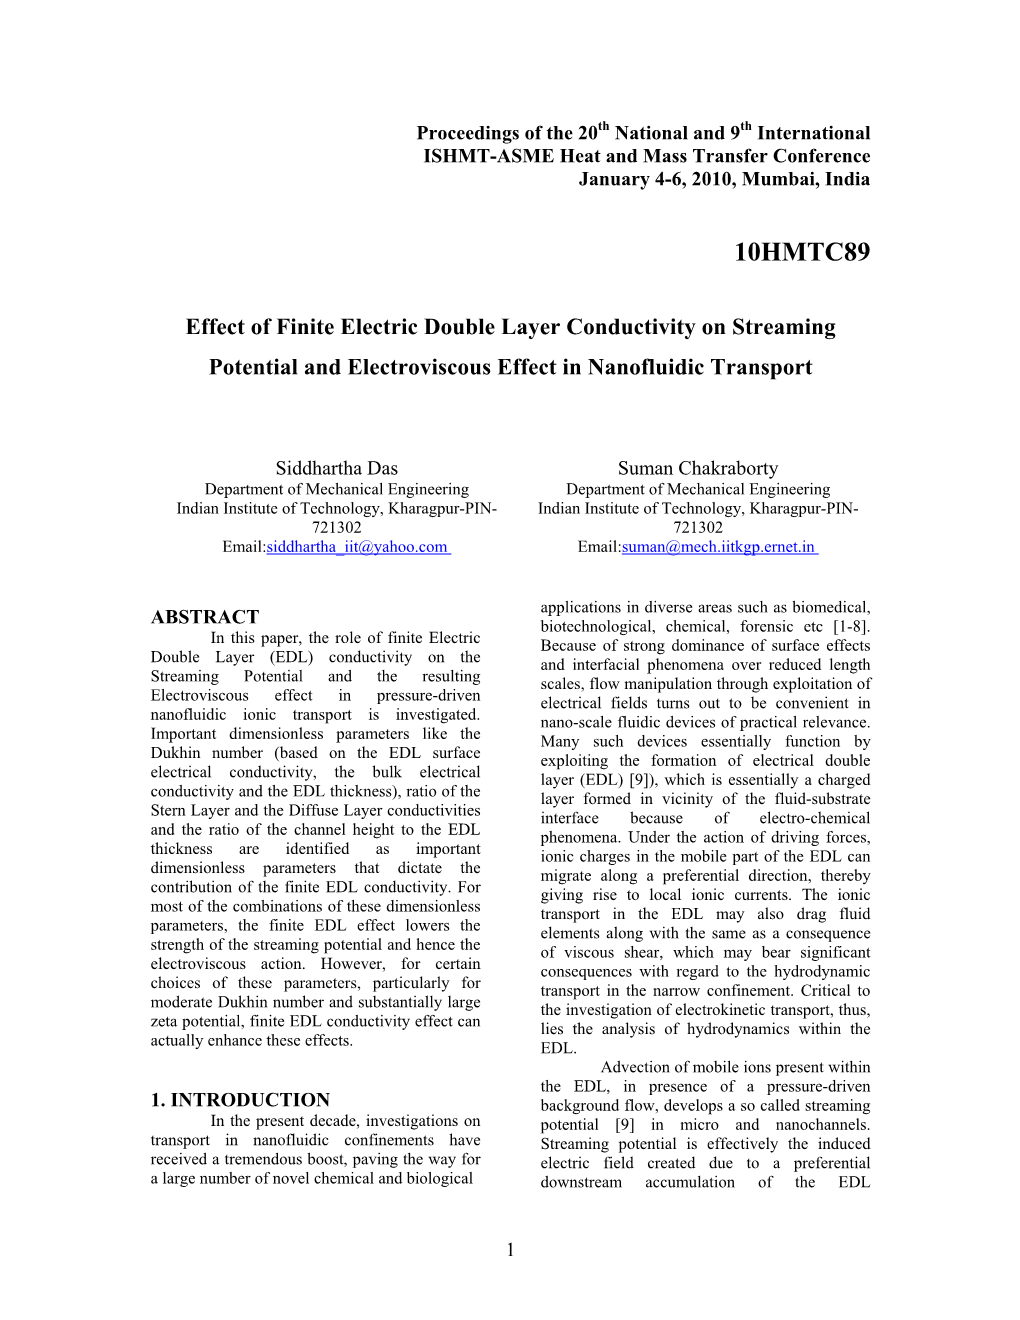 Effect of Finite Electric Double Layer Conductivity on Streaming Current